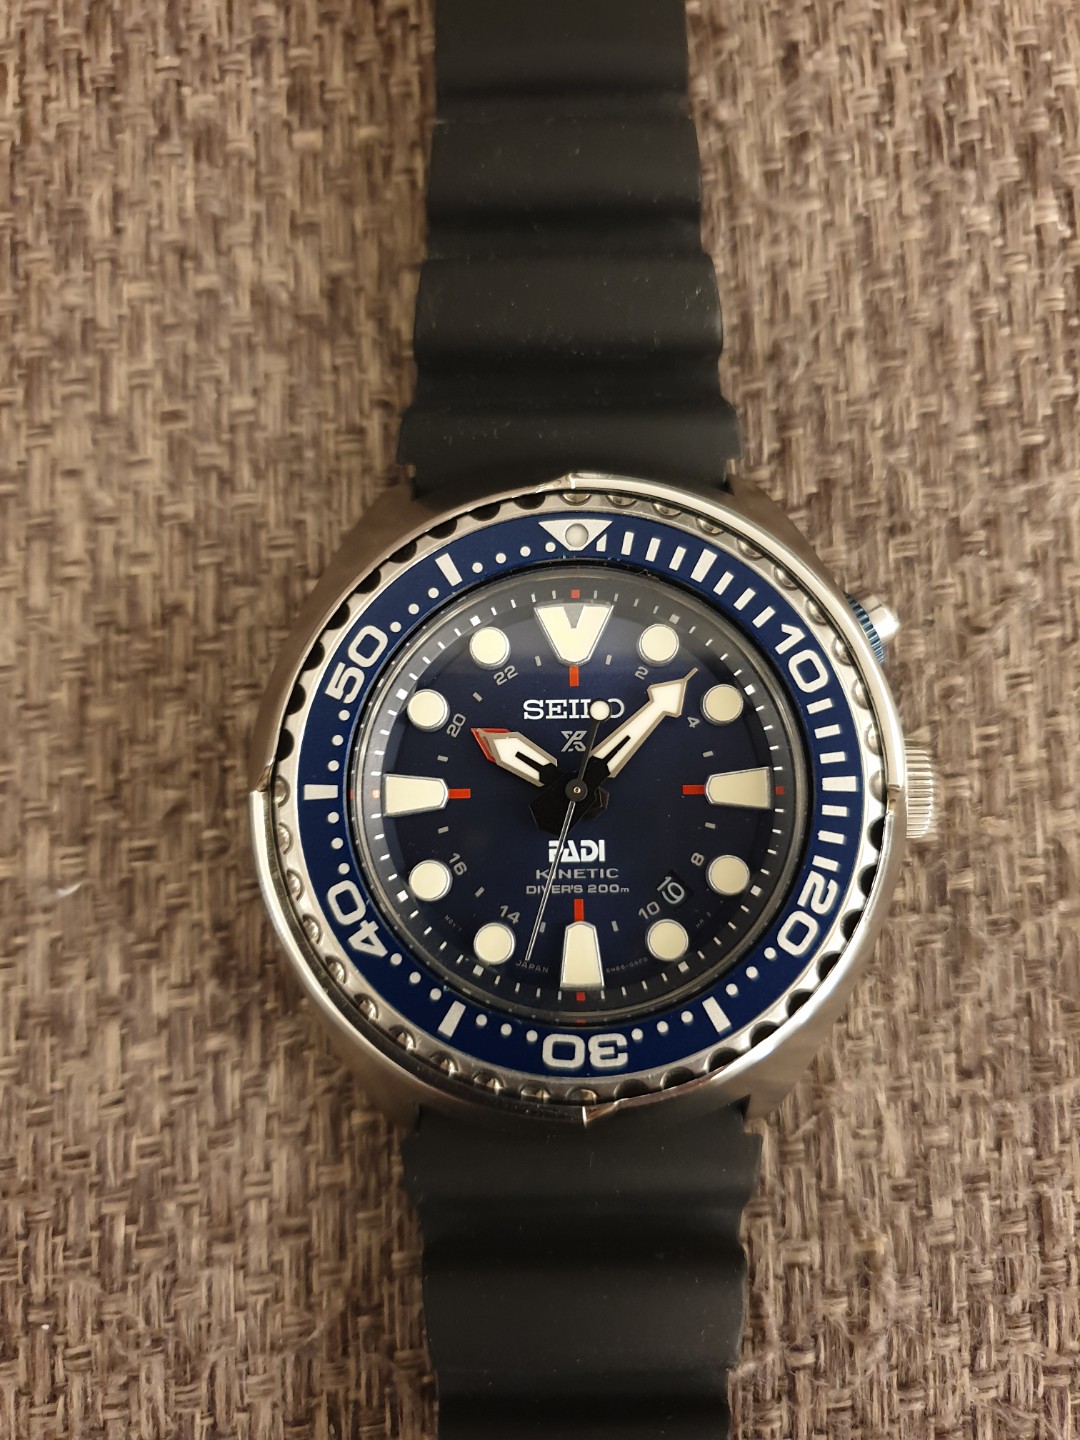 cheapest price* Seiko Prospex Padi Special Edition Kinetic GMT Diver  SUN065, Men's Fashion, Watches & Accessories, Watches on Carousell